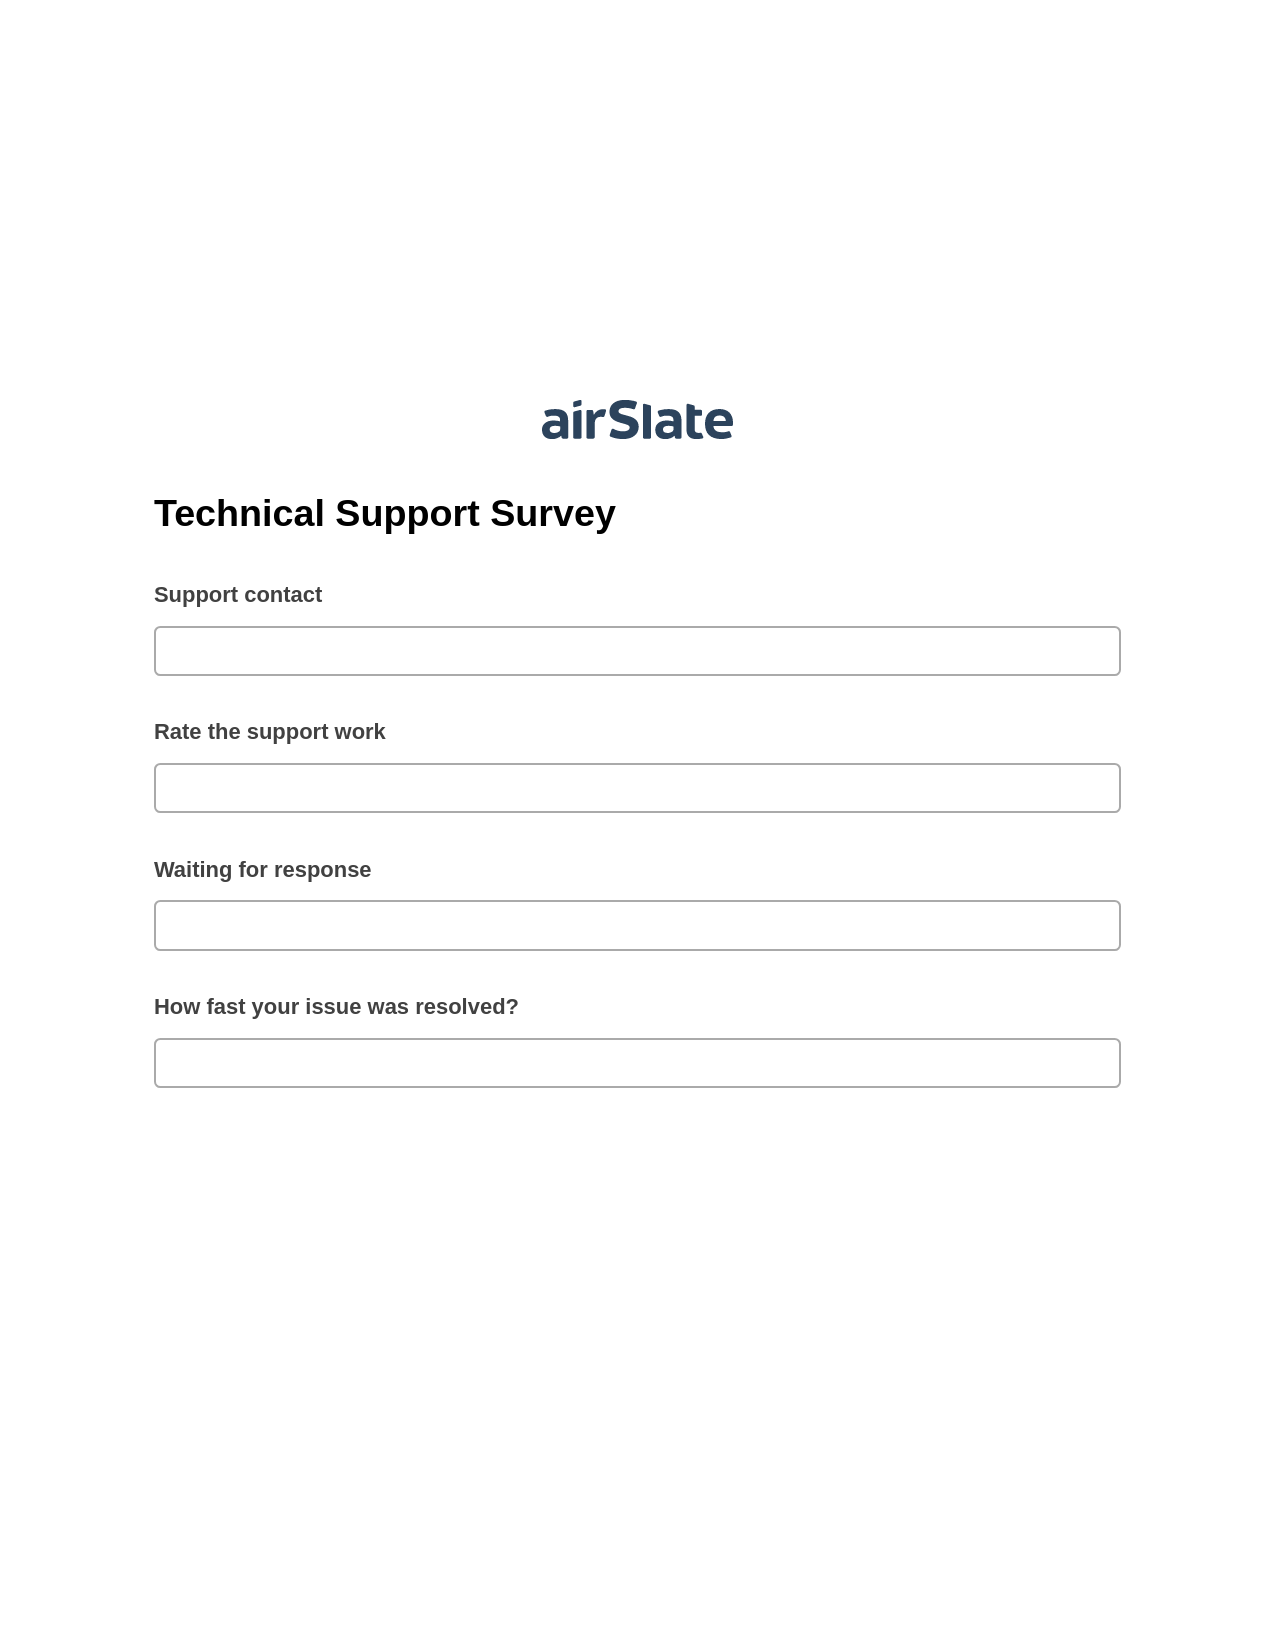 Multirole Technical Support Survey Pre-fill from CSV File Bot, Unassign Role Bot, Export to Salesforce Record Bot